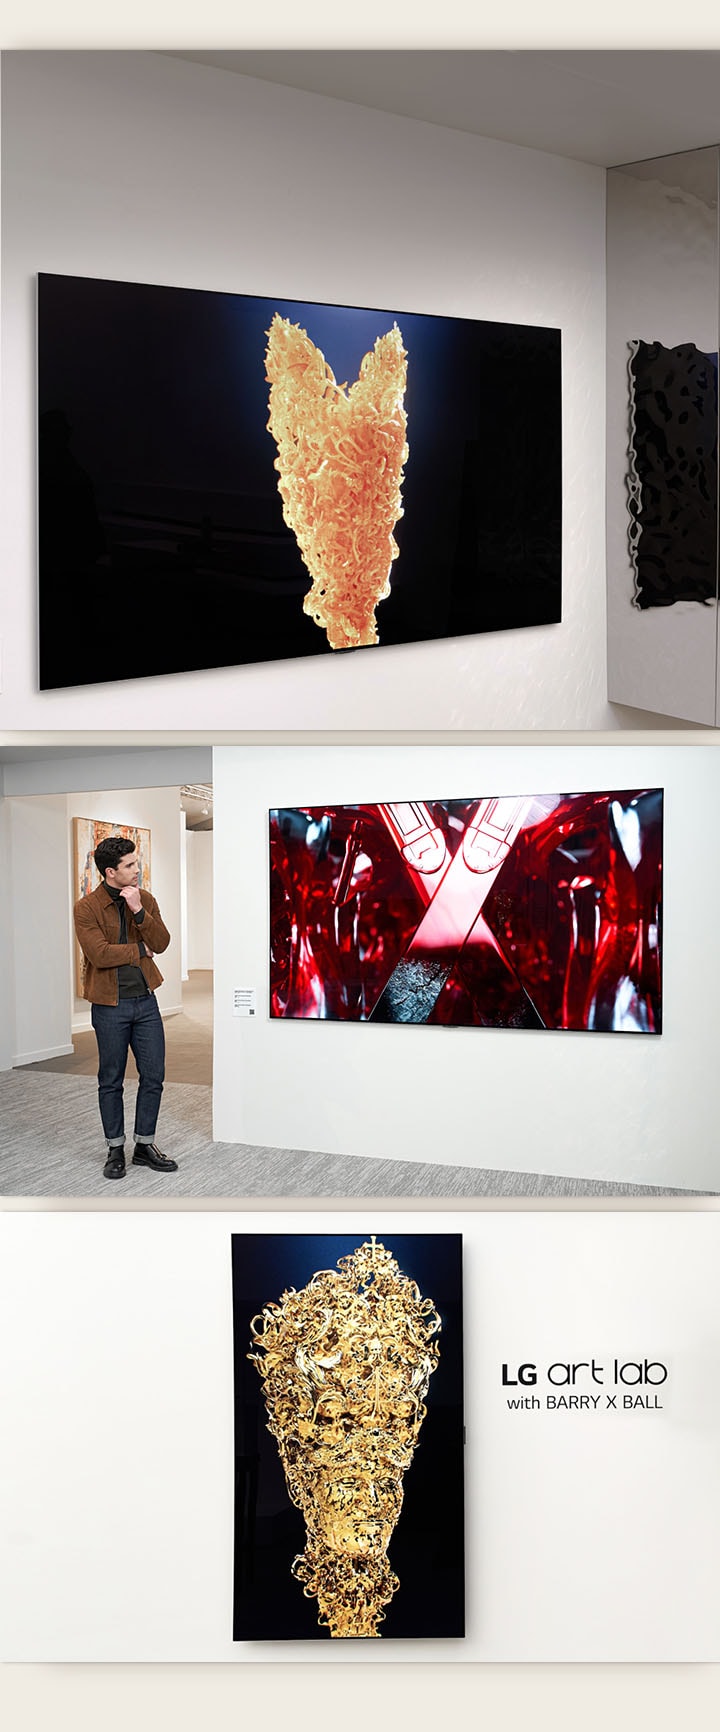 The top image shows an LG OLED in a white room with a picture of a gold sculpture playing on the screen. At its side is a physical silver sculpture with a unique textured pattern reflecting what's playing on the TV. 	  The bottom right image shows an LG OLED on a wall at a vertical alignment shows a gold sculpture resembling a person. The phrase "LG art lab with Barry X Ball" is overlayed on the image on the right-hand side of the TV. The bottom left images shows a man in an art gallery looking at a red and black digital artwork of a sculpture on an LG OLED.